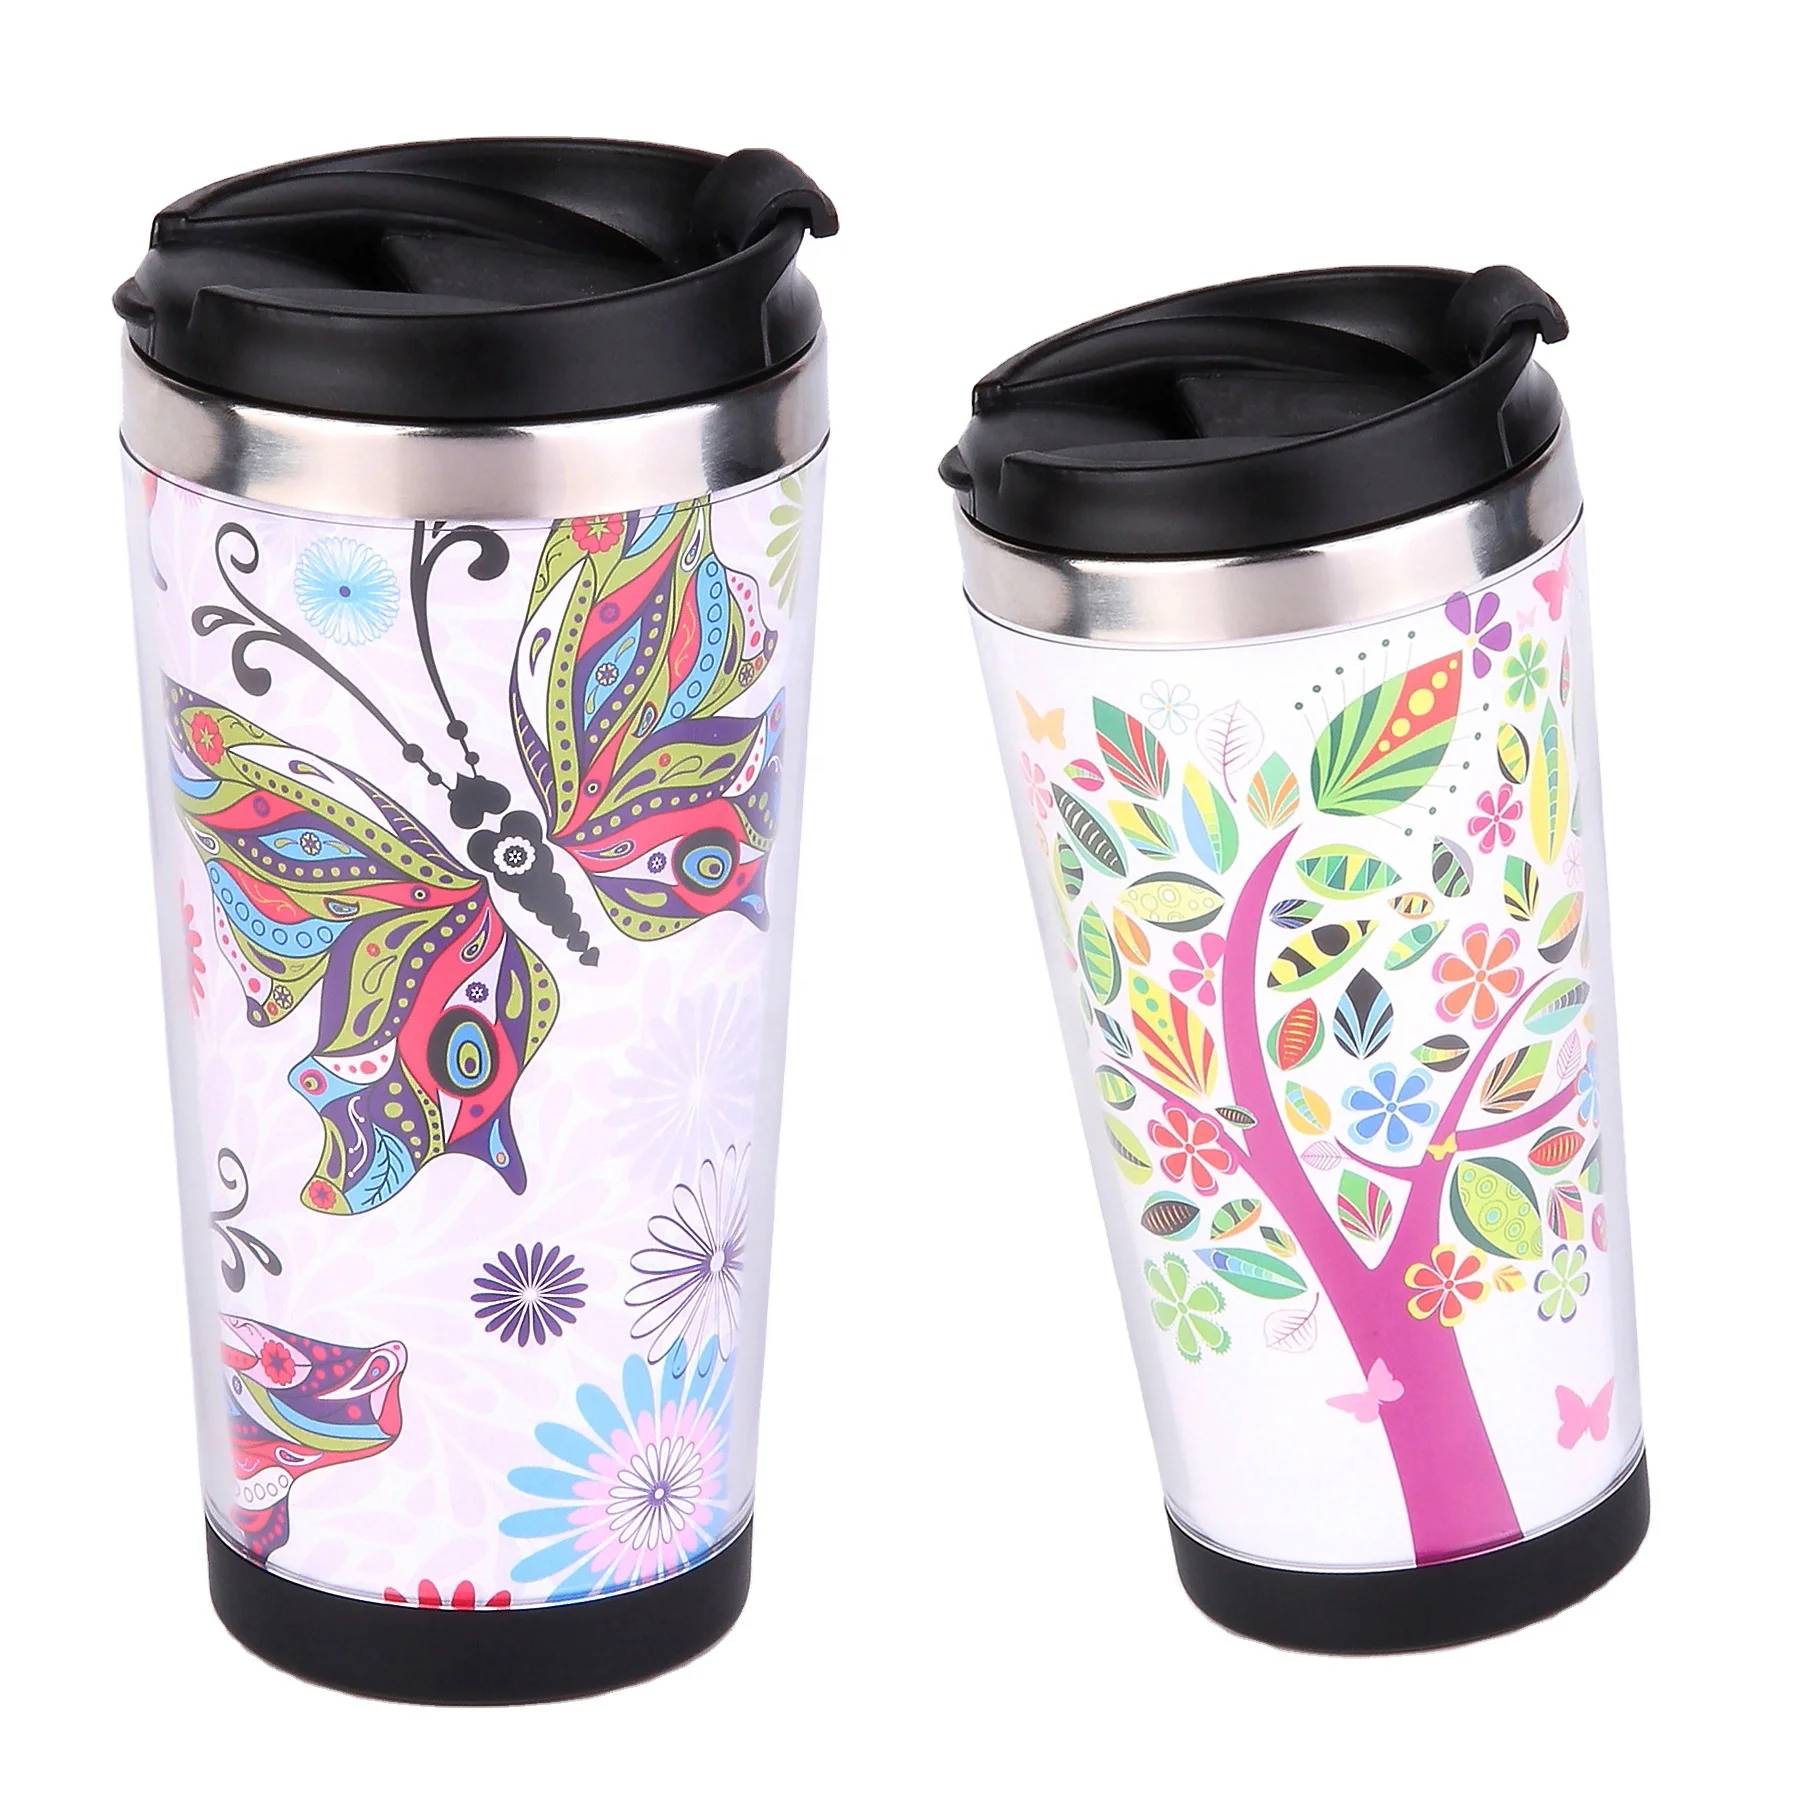 

16oz double wall stainless steel tumbler travel mug with DIY custom paper insert